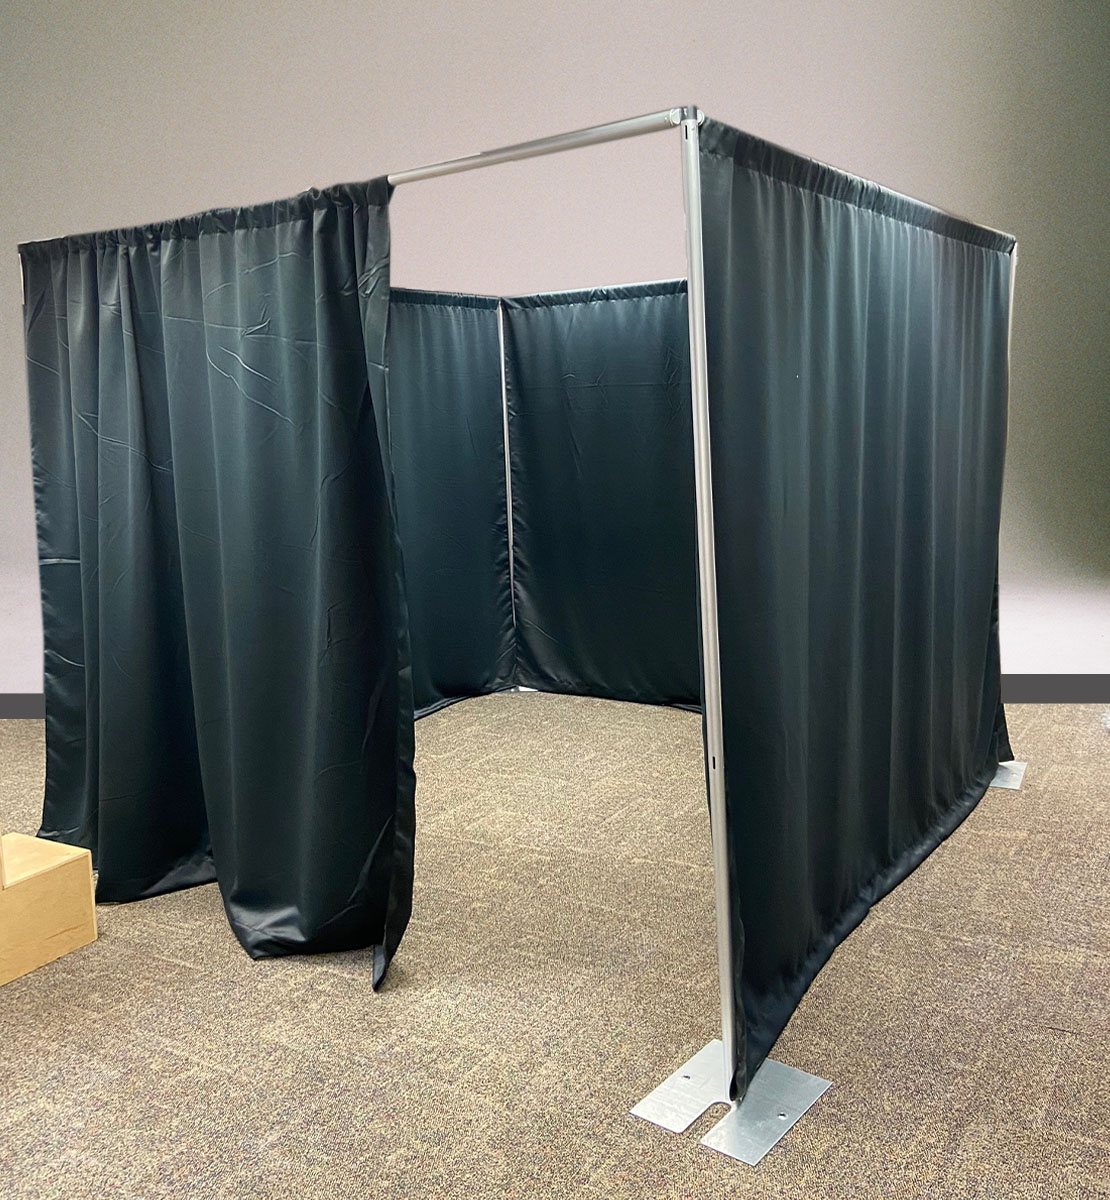 Pipe and Drape Room Divider